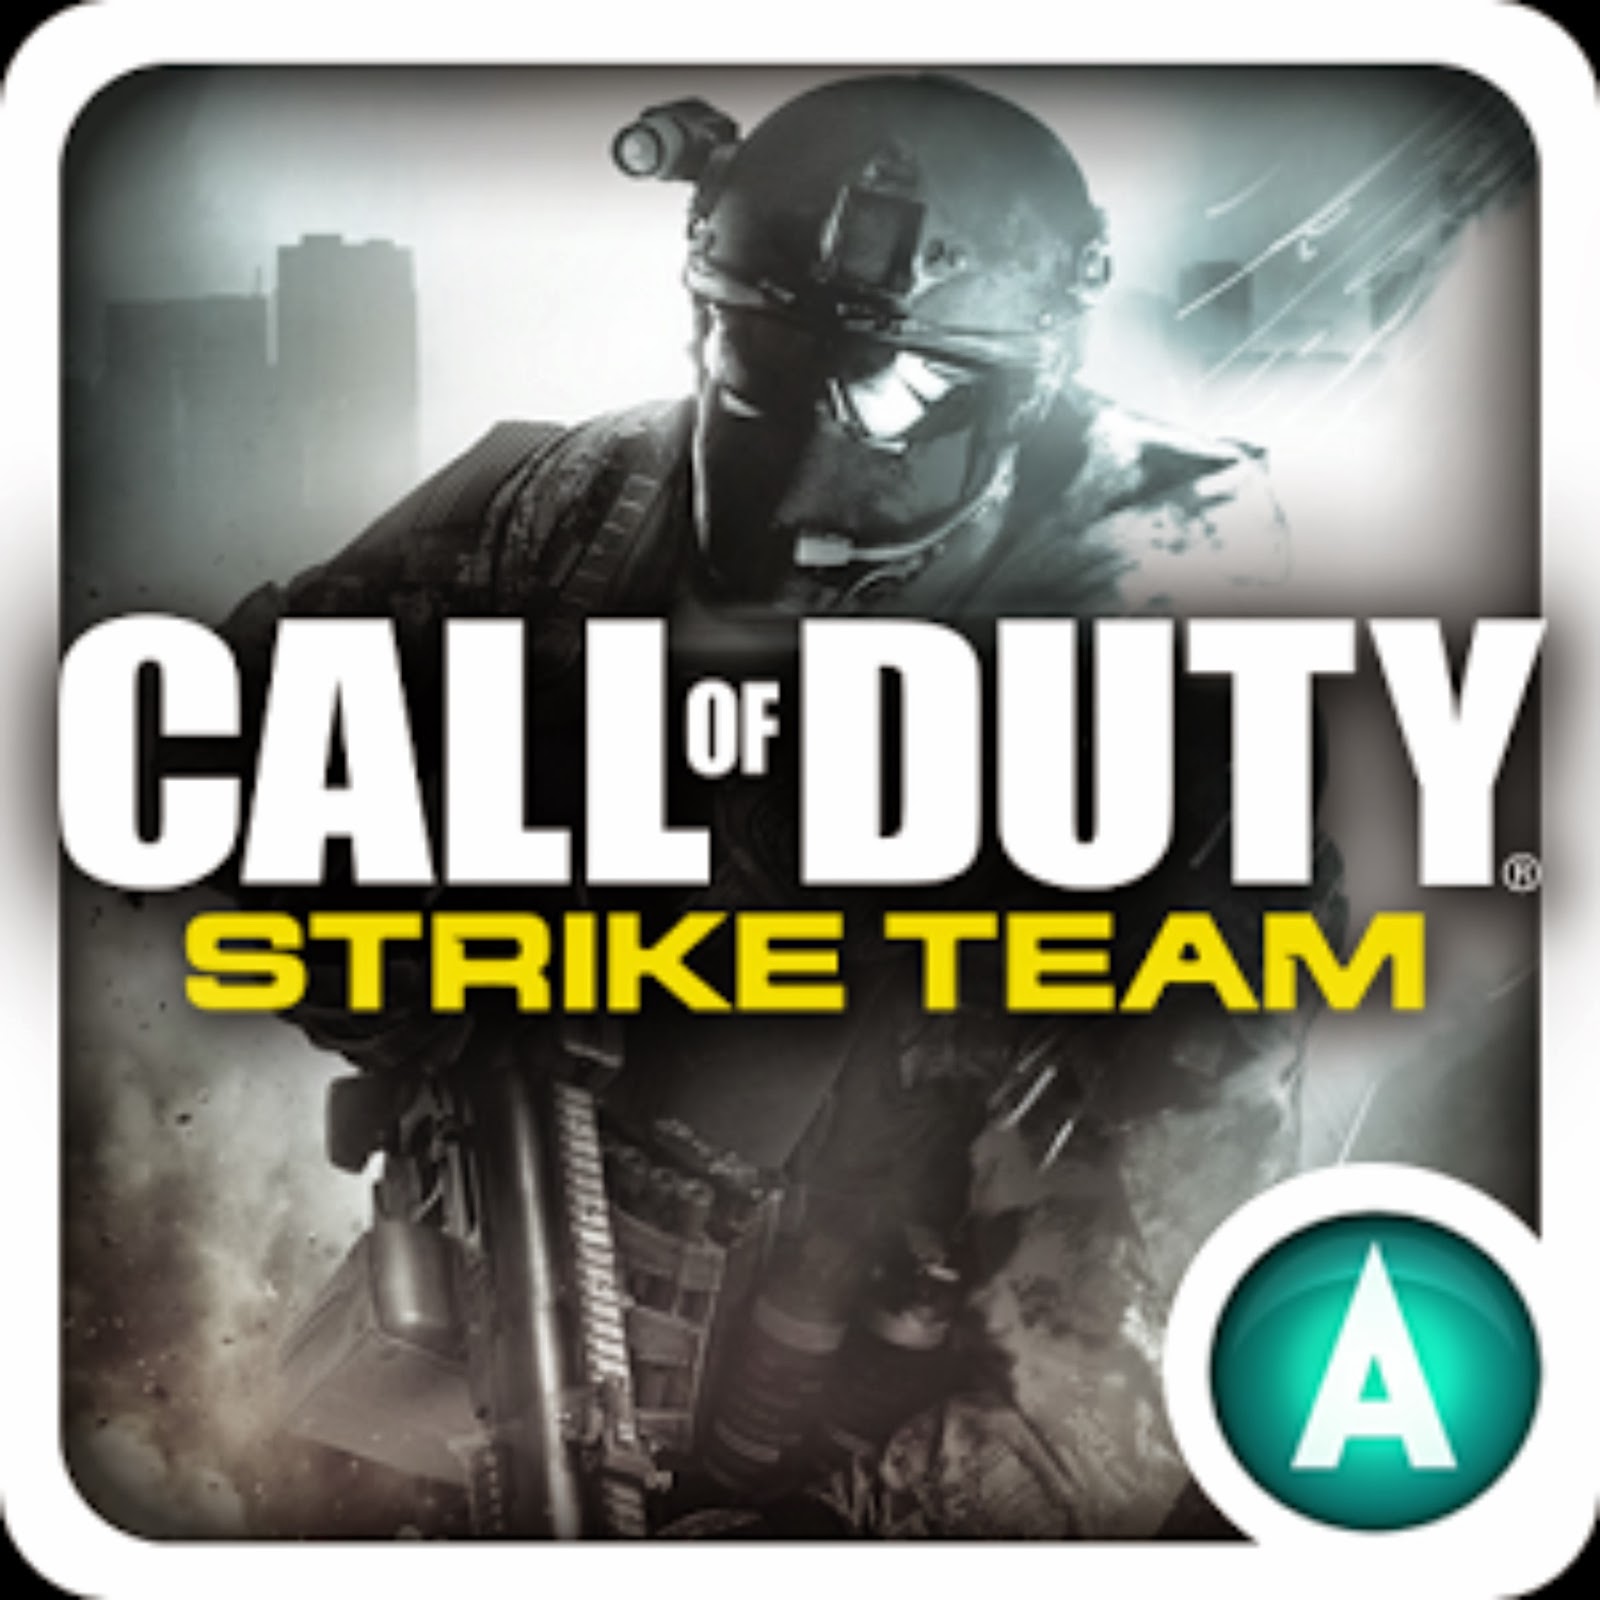 call of duty strike team full game free pc, download, play. download ...